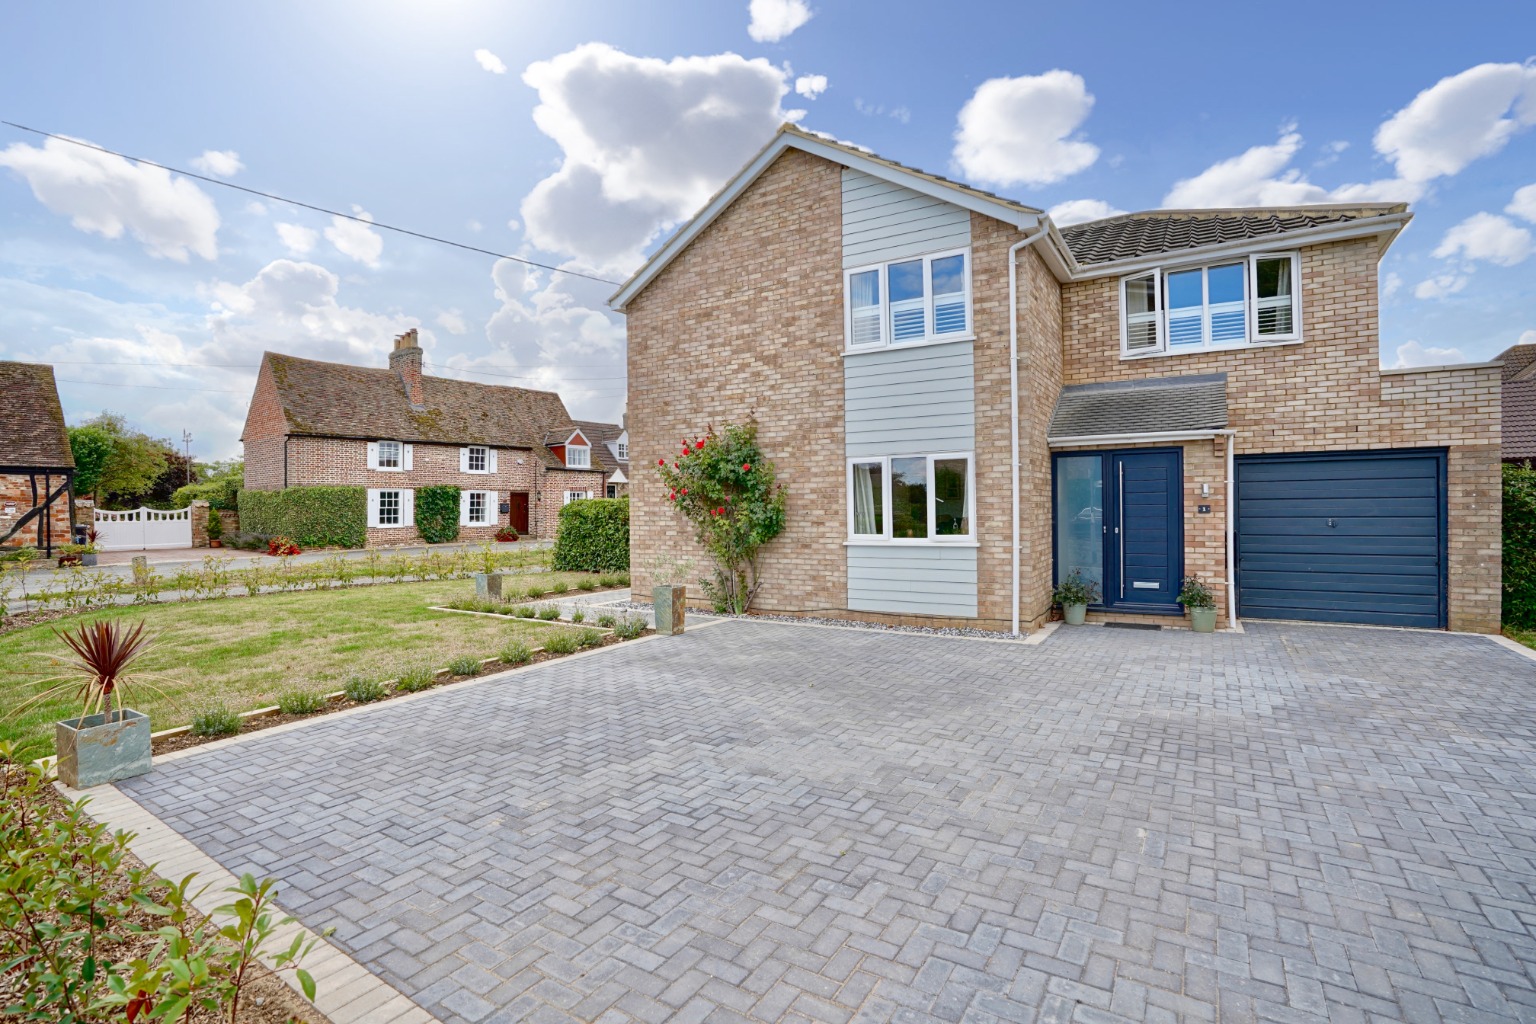 5 bed detached house for sale in Orchard Close, St. Neots - Property Image 1